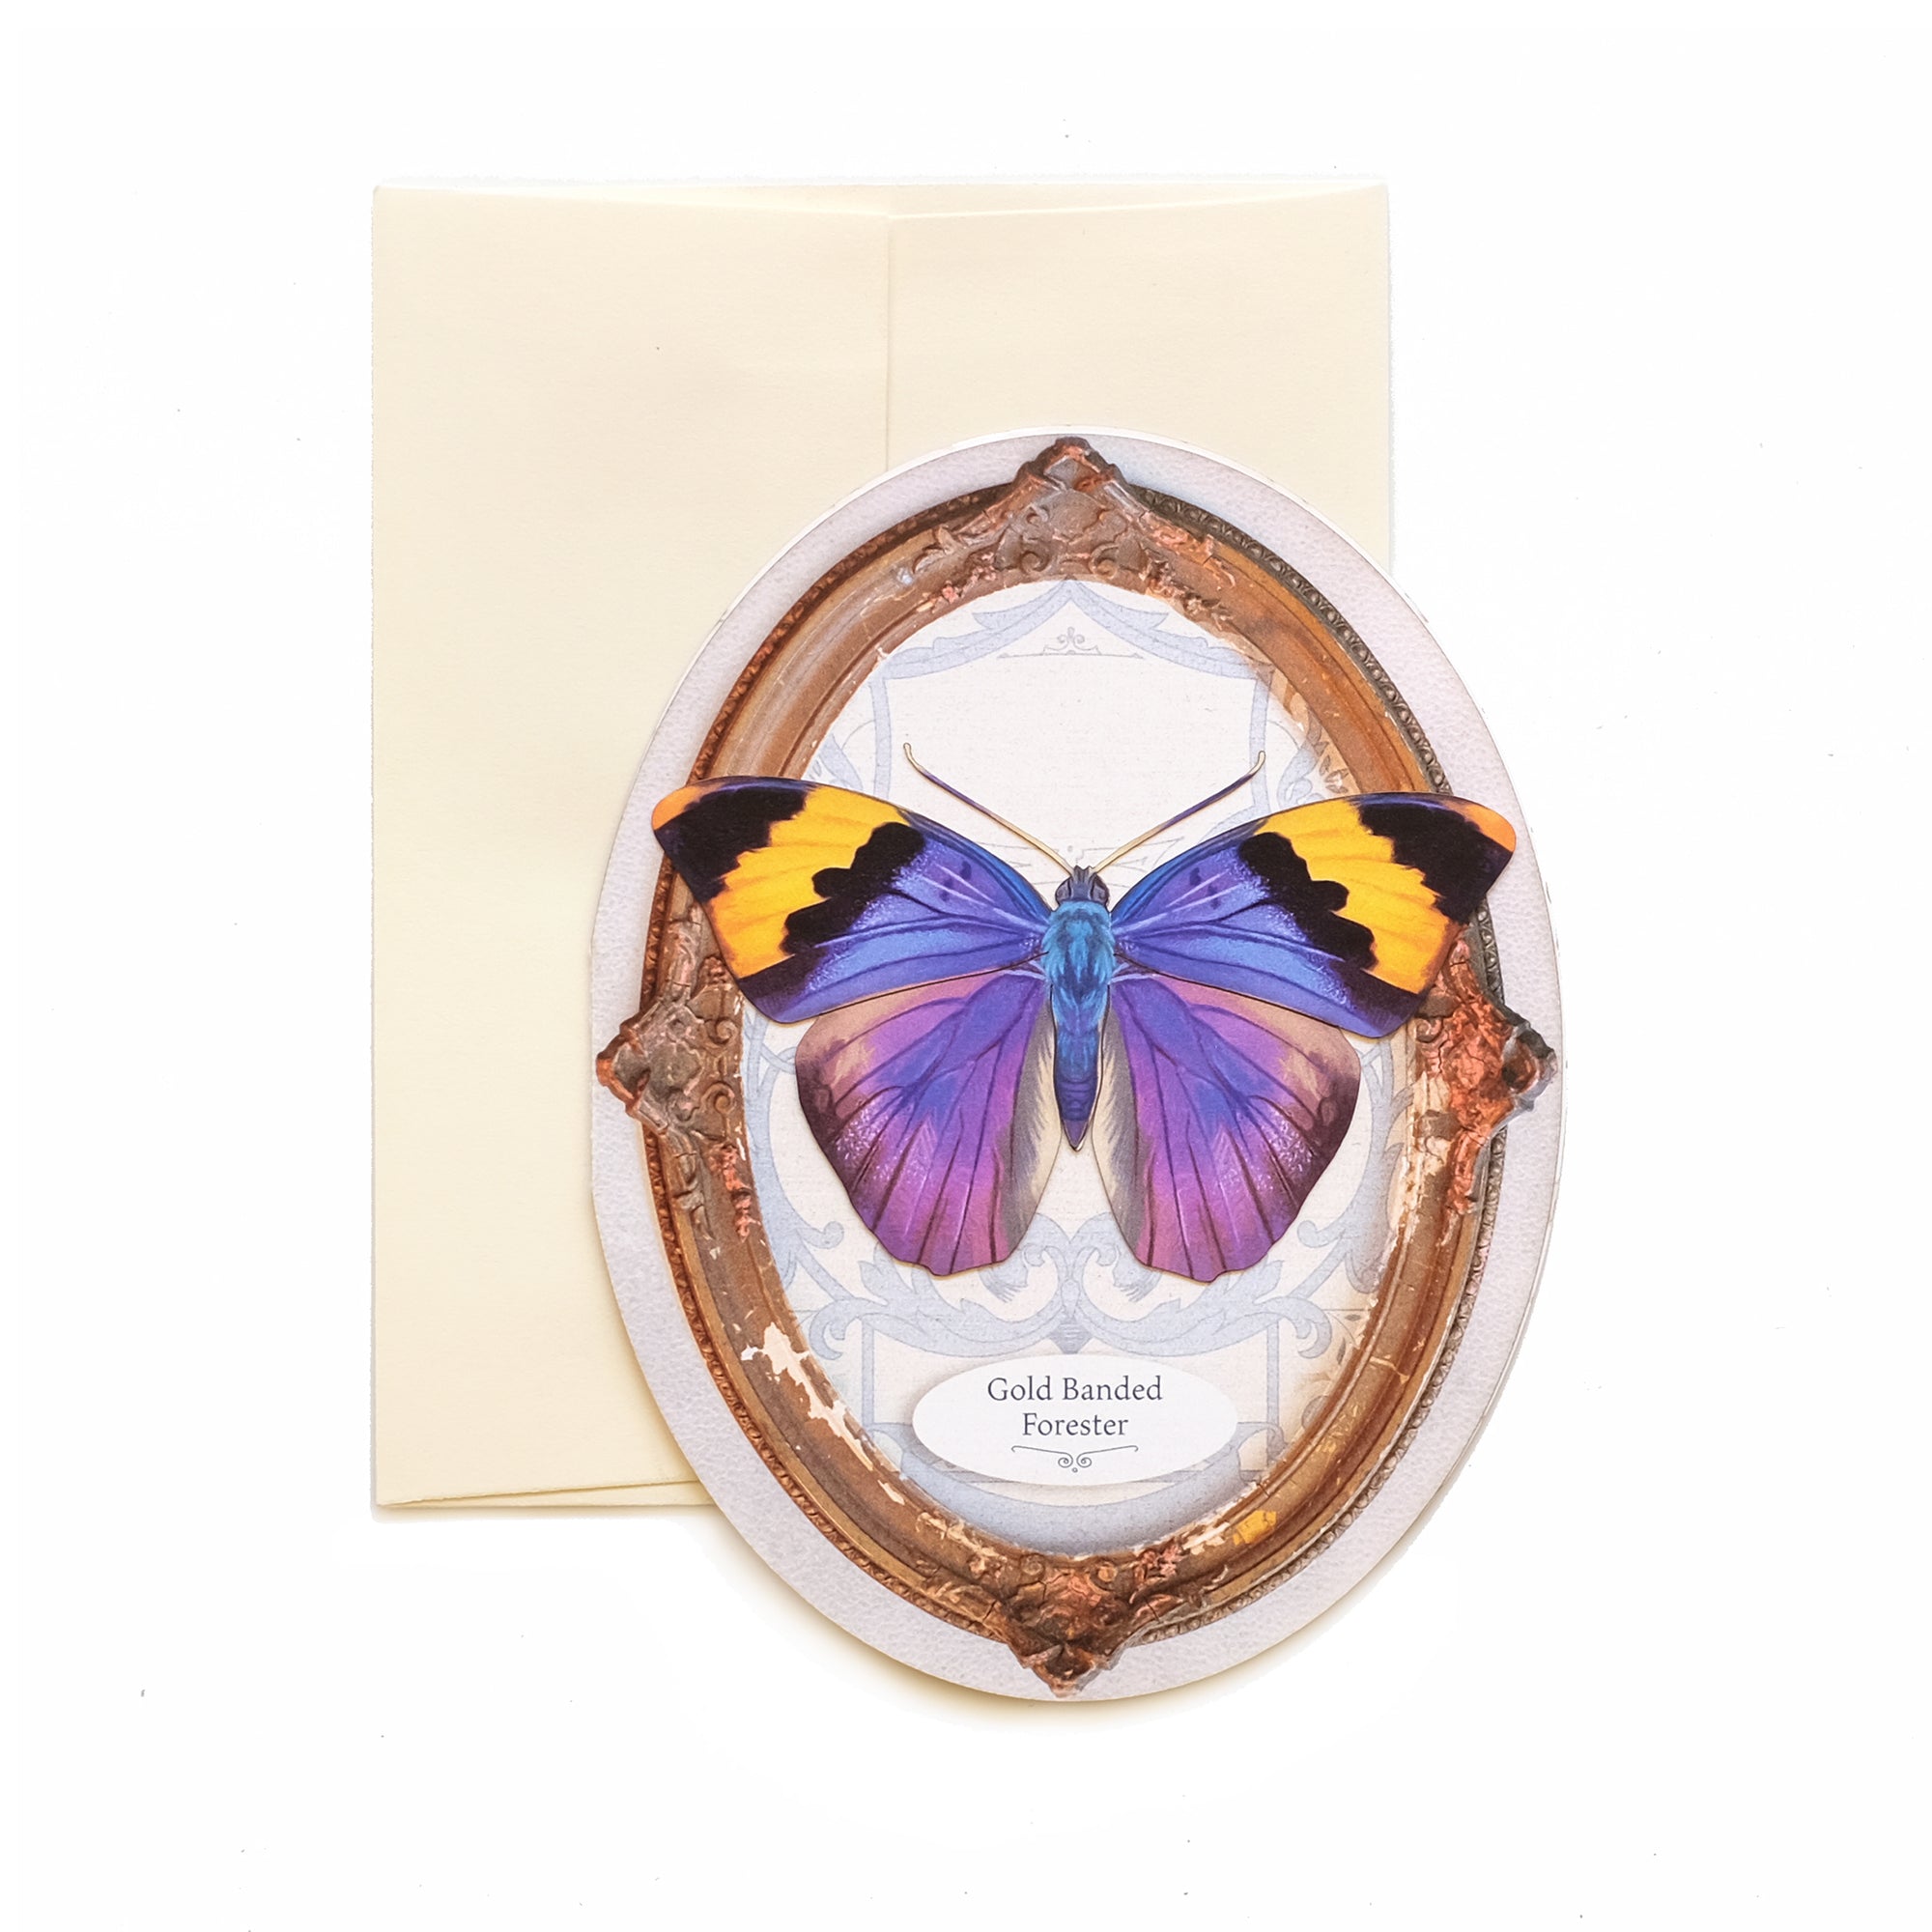 Gold Banded Forester Butterfly Oval Greeting Card - Set of 4 - Reseller Wholesale